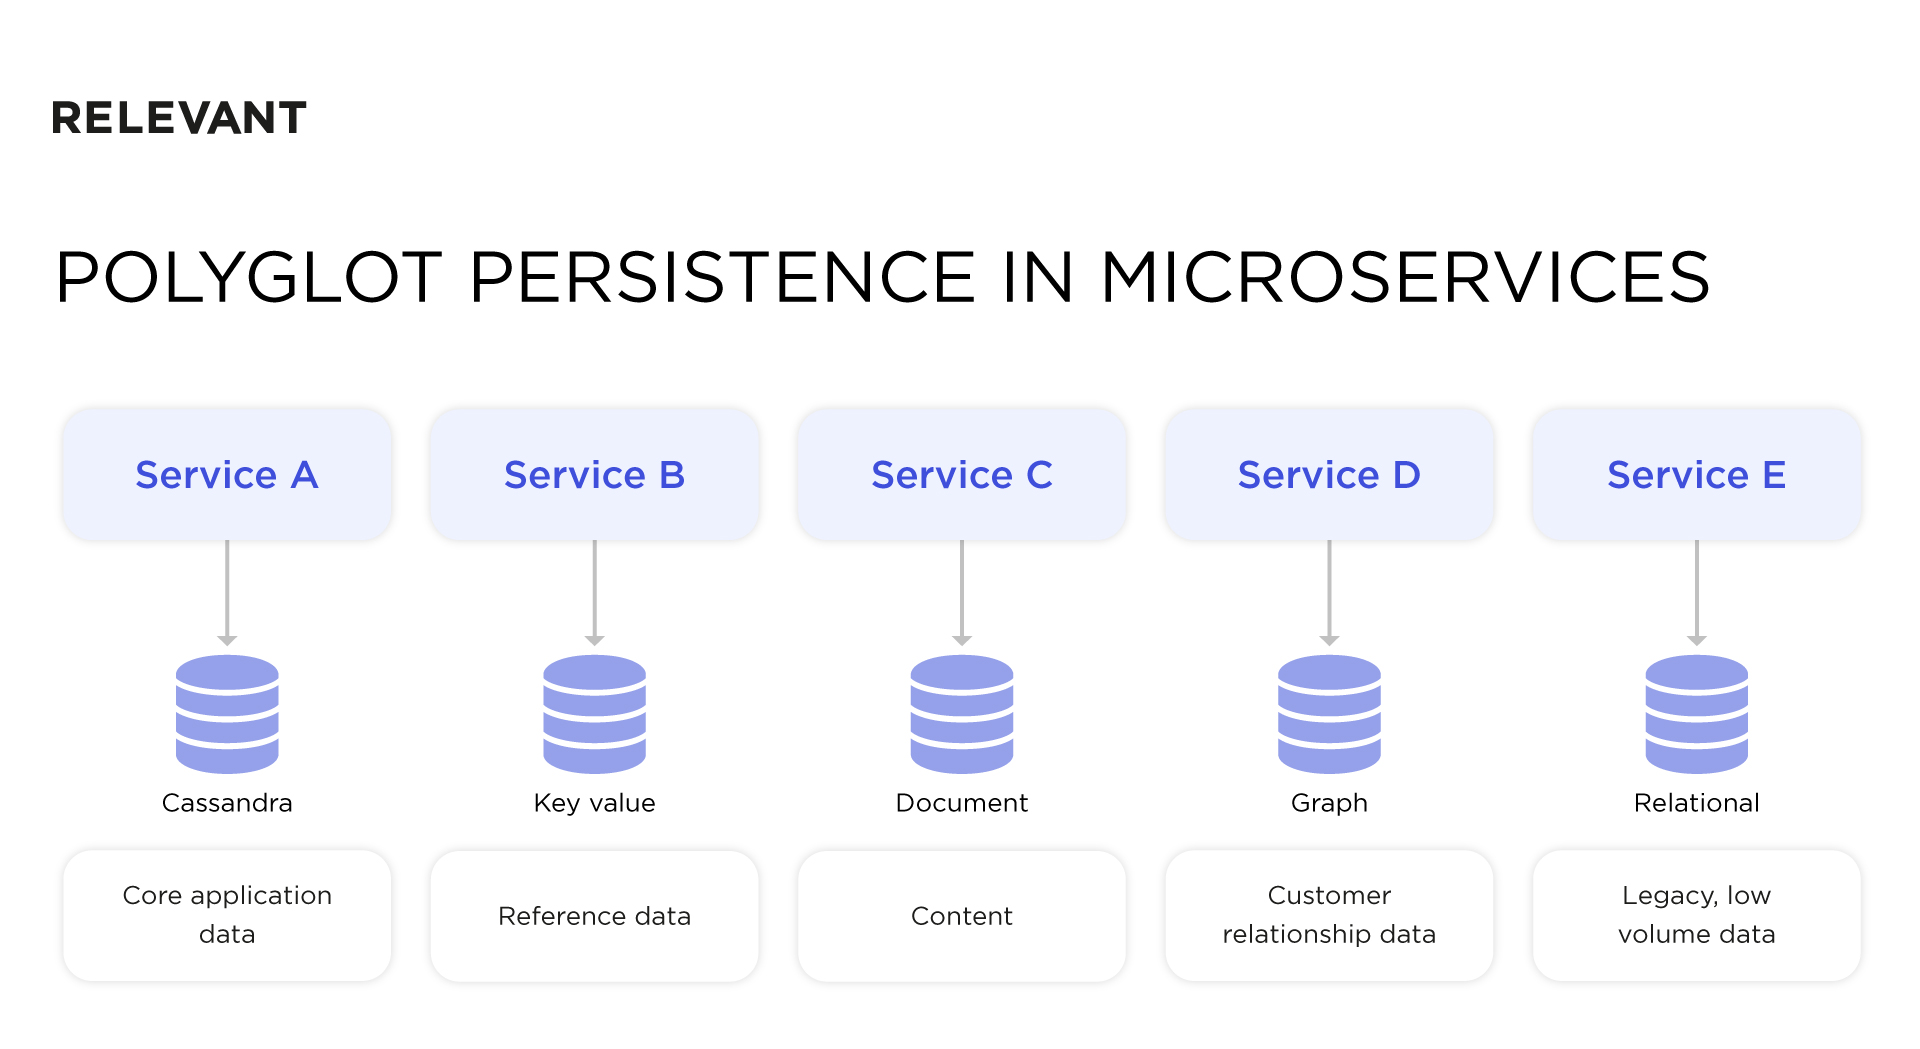 Polyglot persistence in microservices